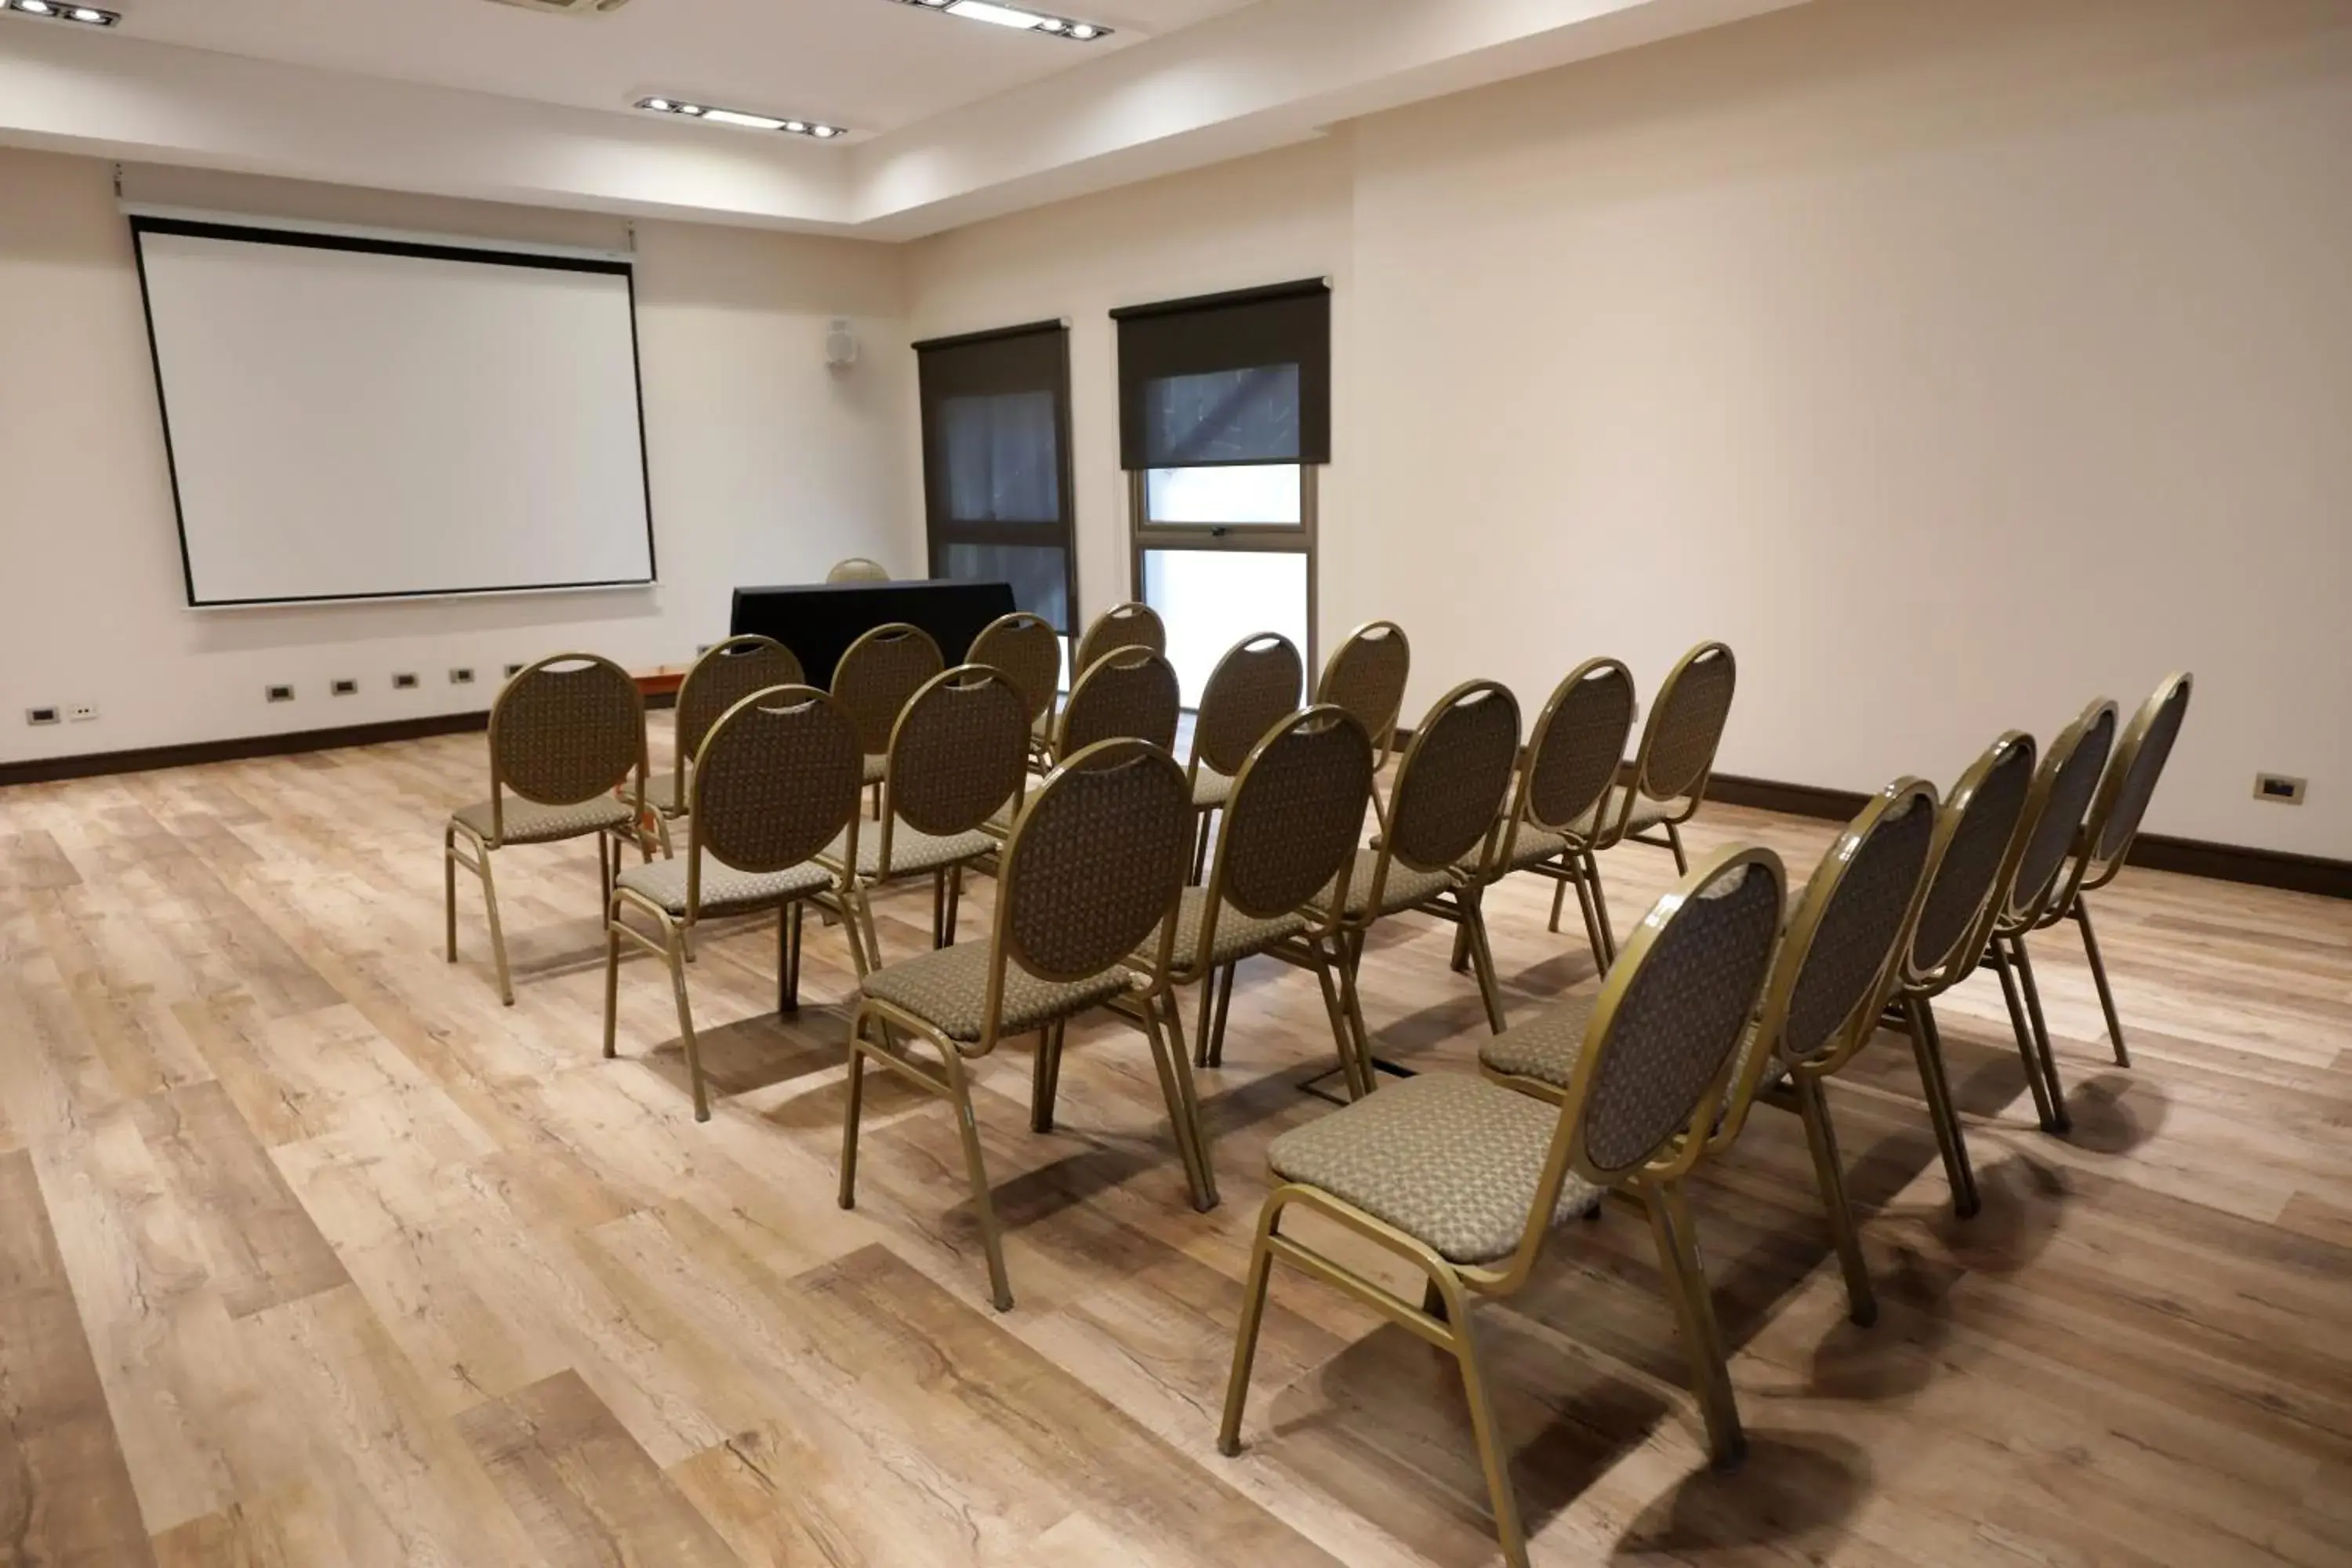 Meeting/conference room in Mod Hotels Mendoza